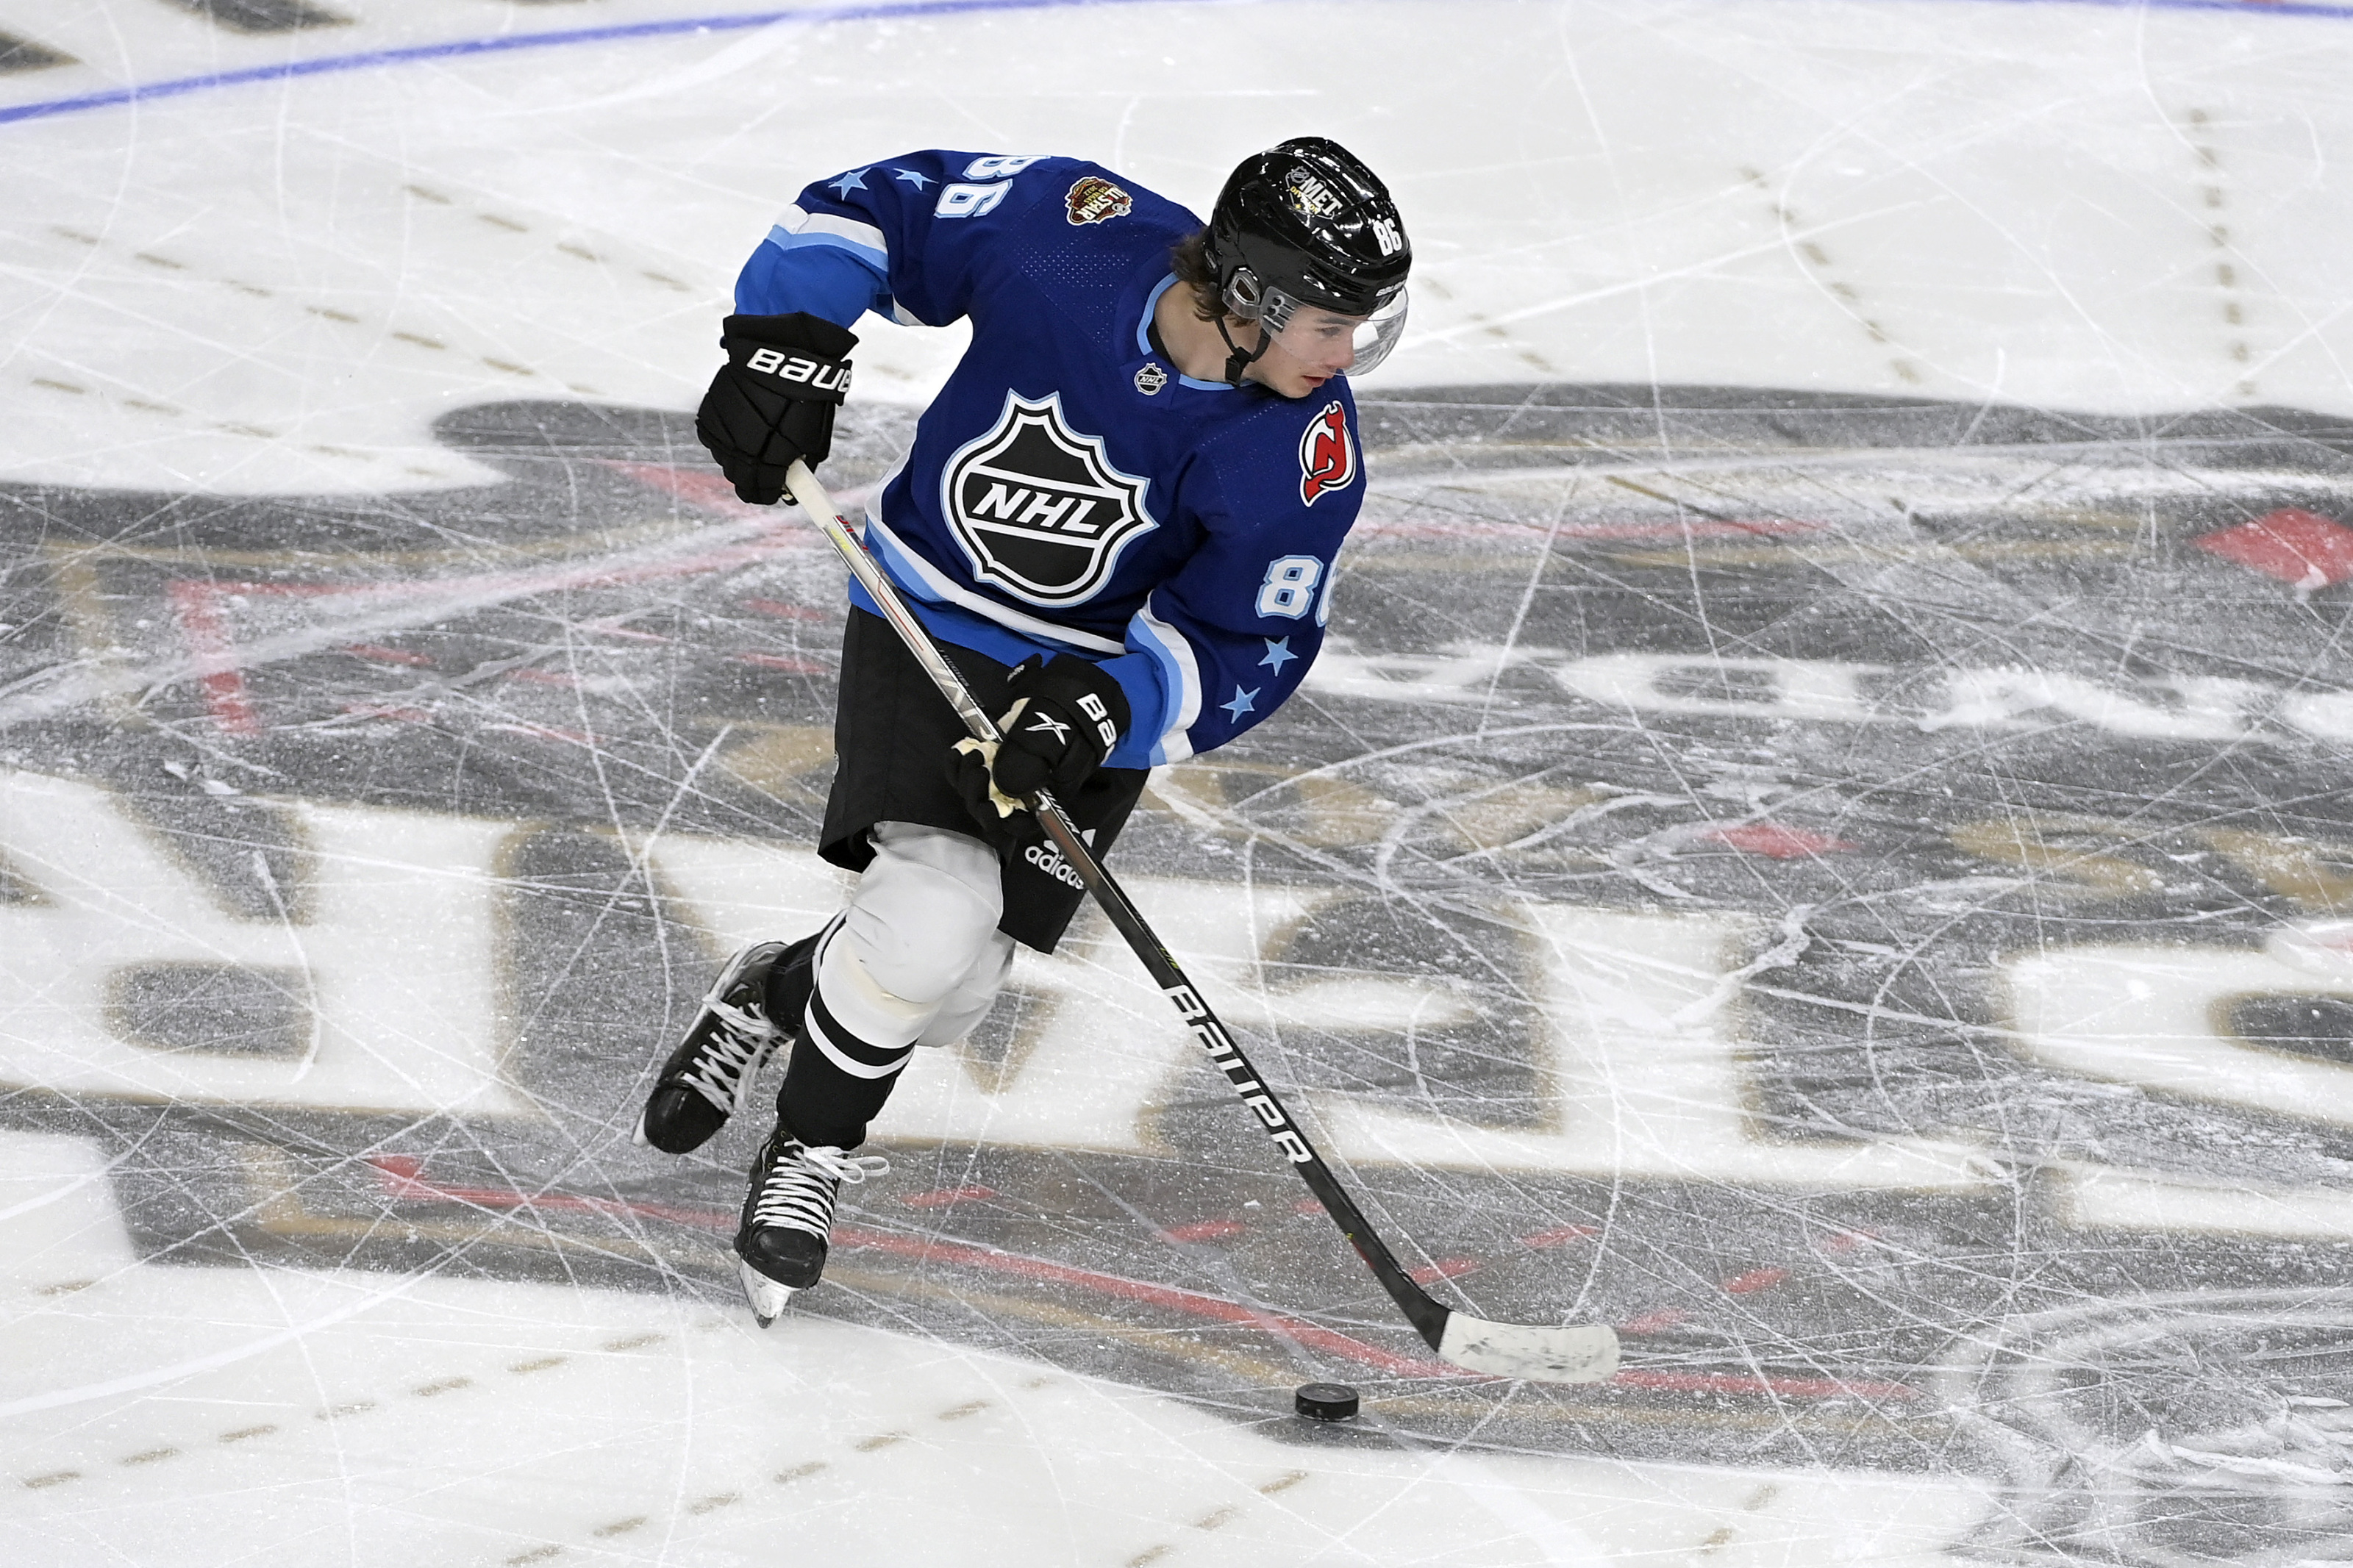 New Jersey Devils: Recapping Jack Hughes' All-Star Weekend